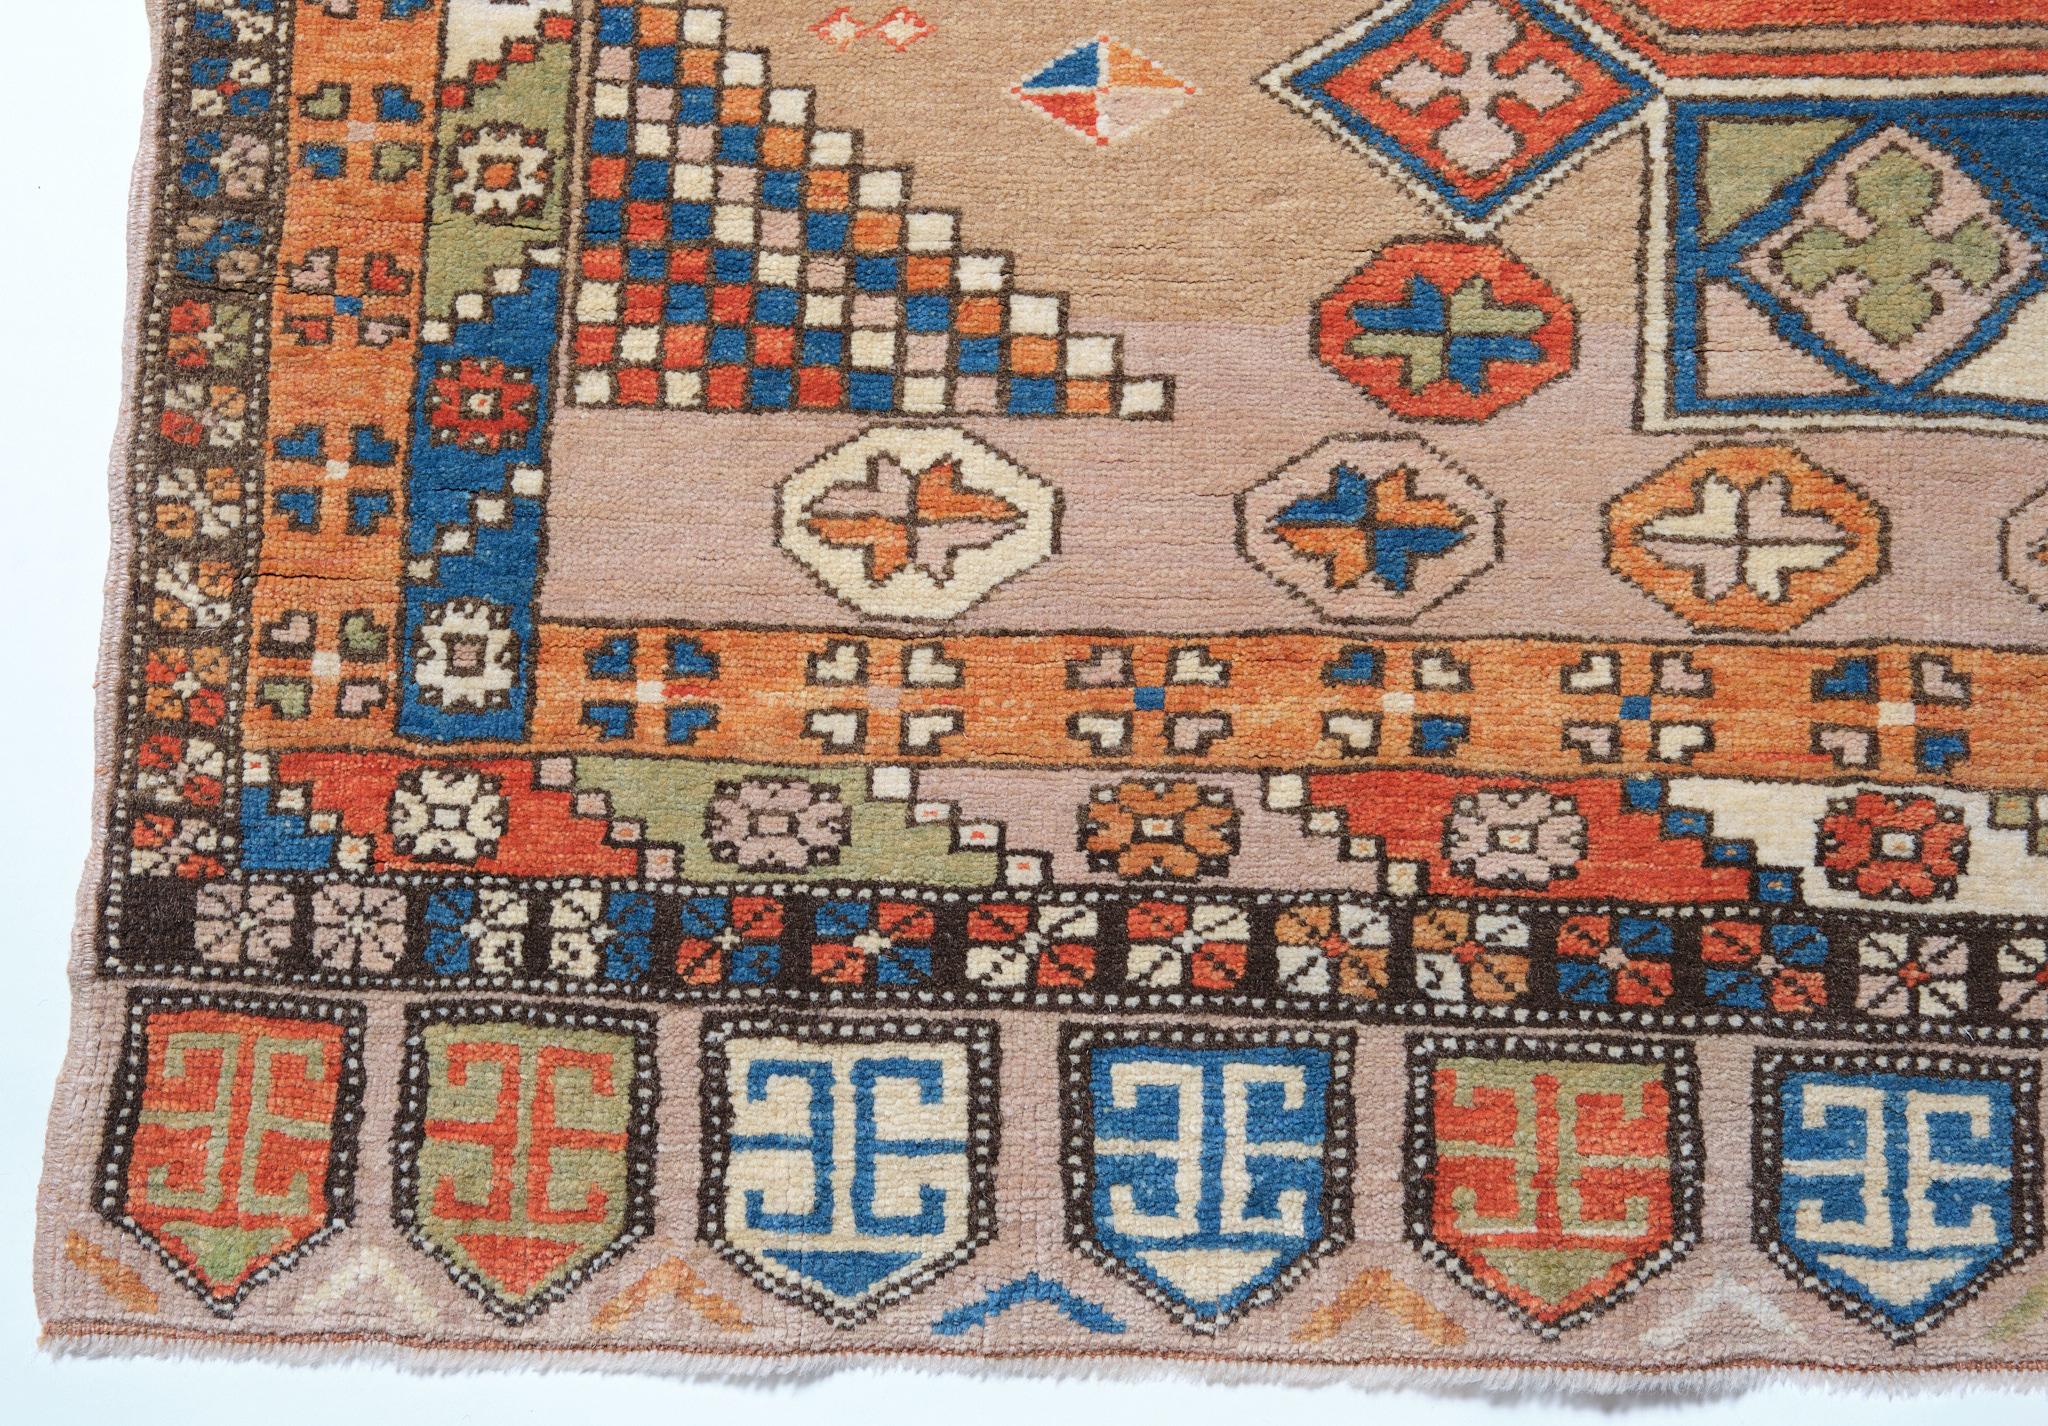 This dual medallion is the main element of the design of the 18th-century carpet from the Konya region, Central Anatolia area of Turkey. Rugs of this type, using two medallions, appear frequently in 15th-century paintings of both the Venetian and